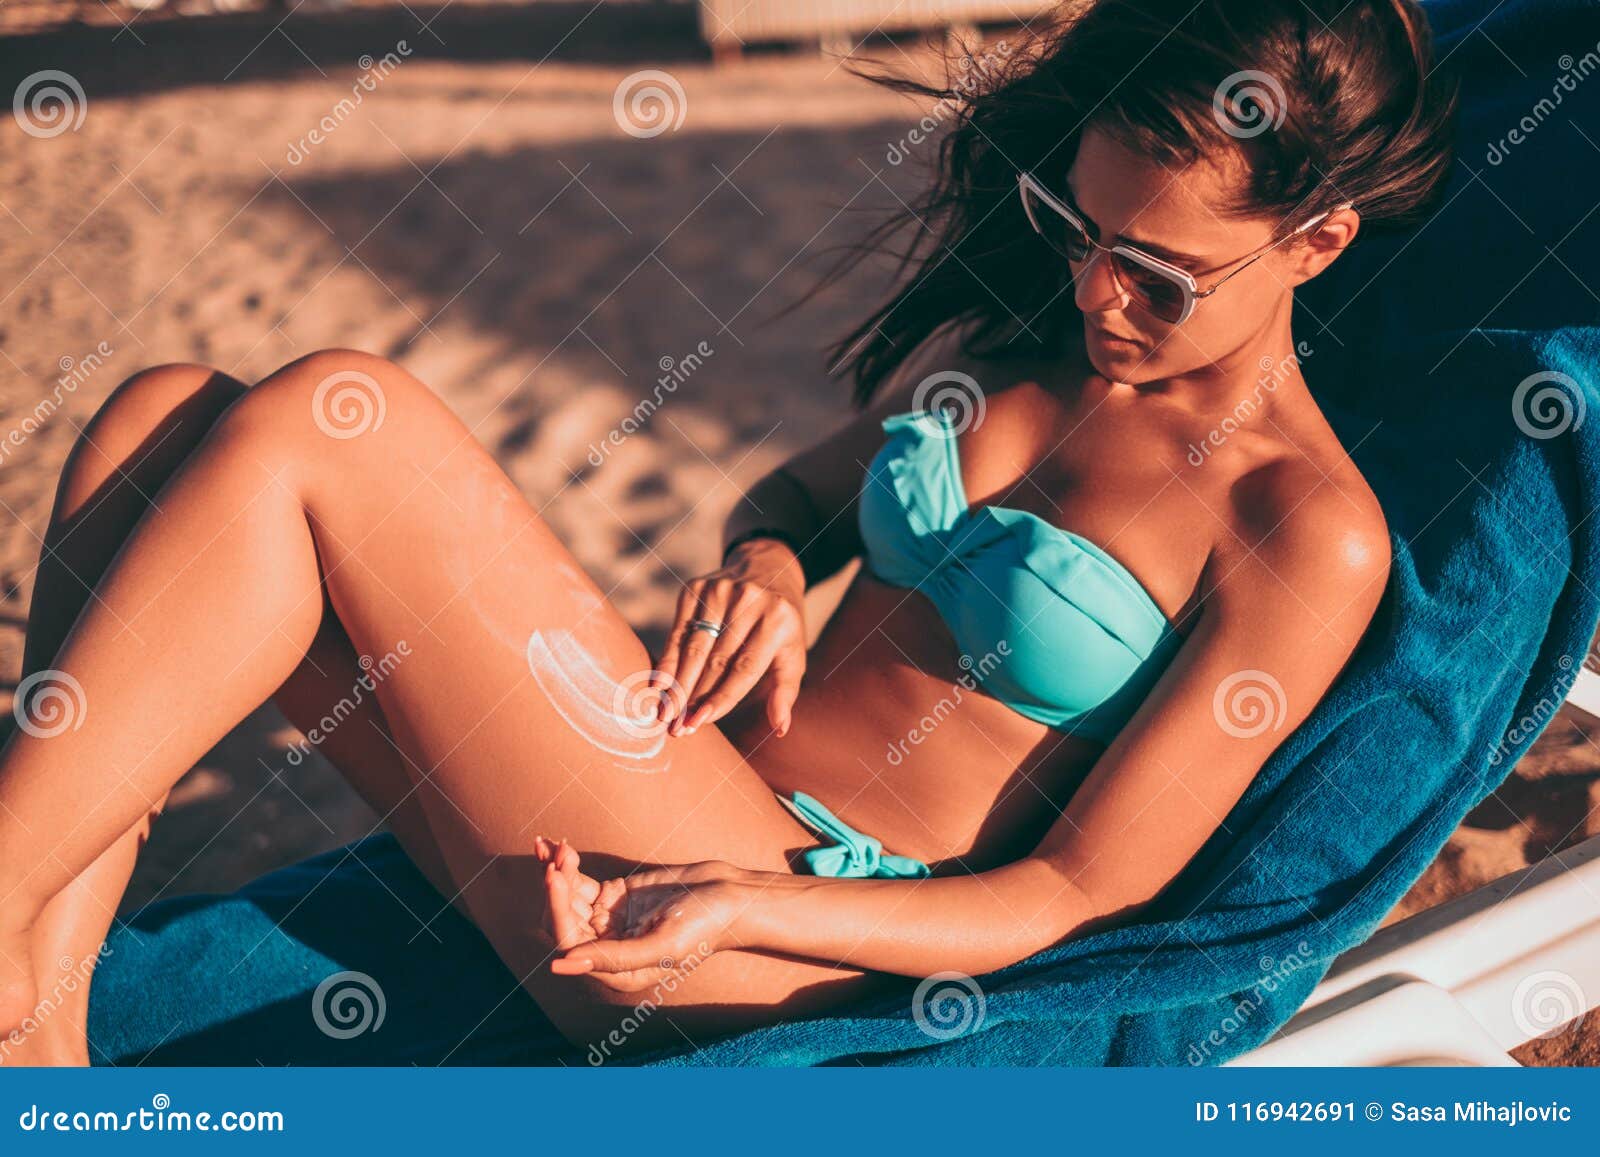 girl applying sunscreen while lying on the on the beach